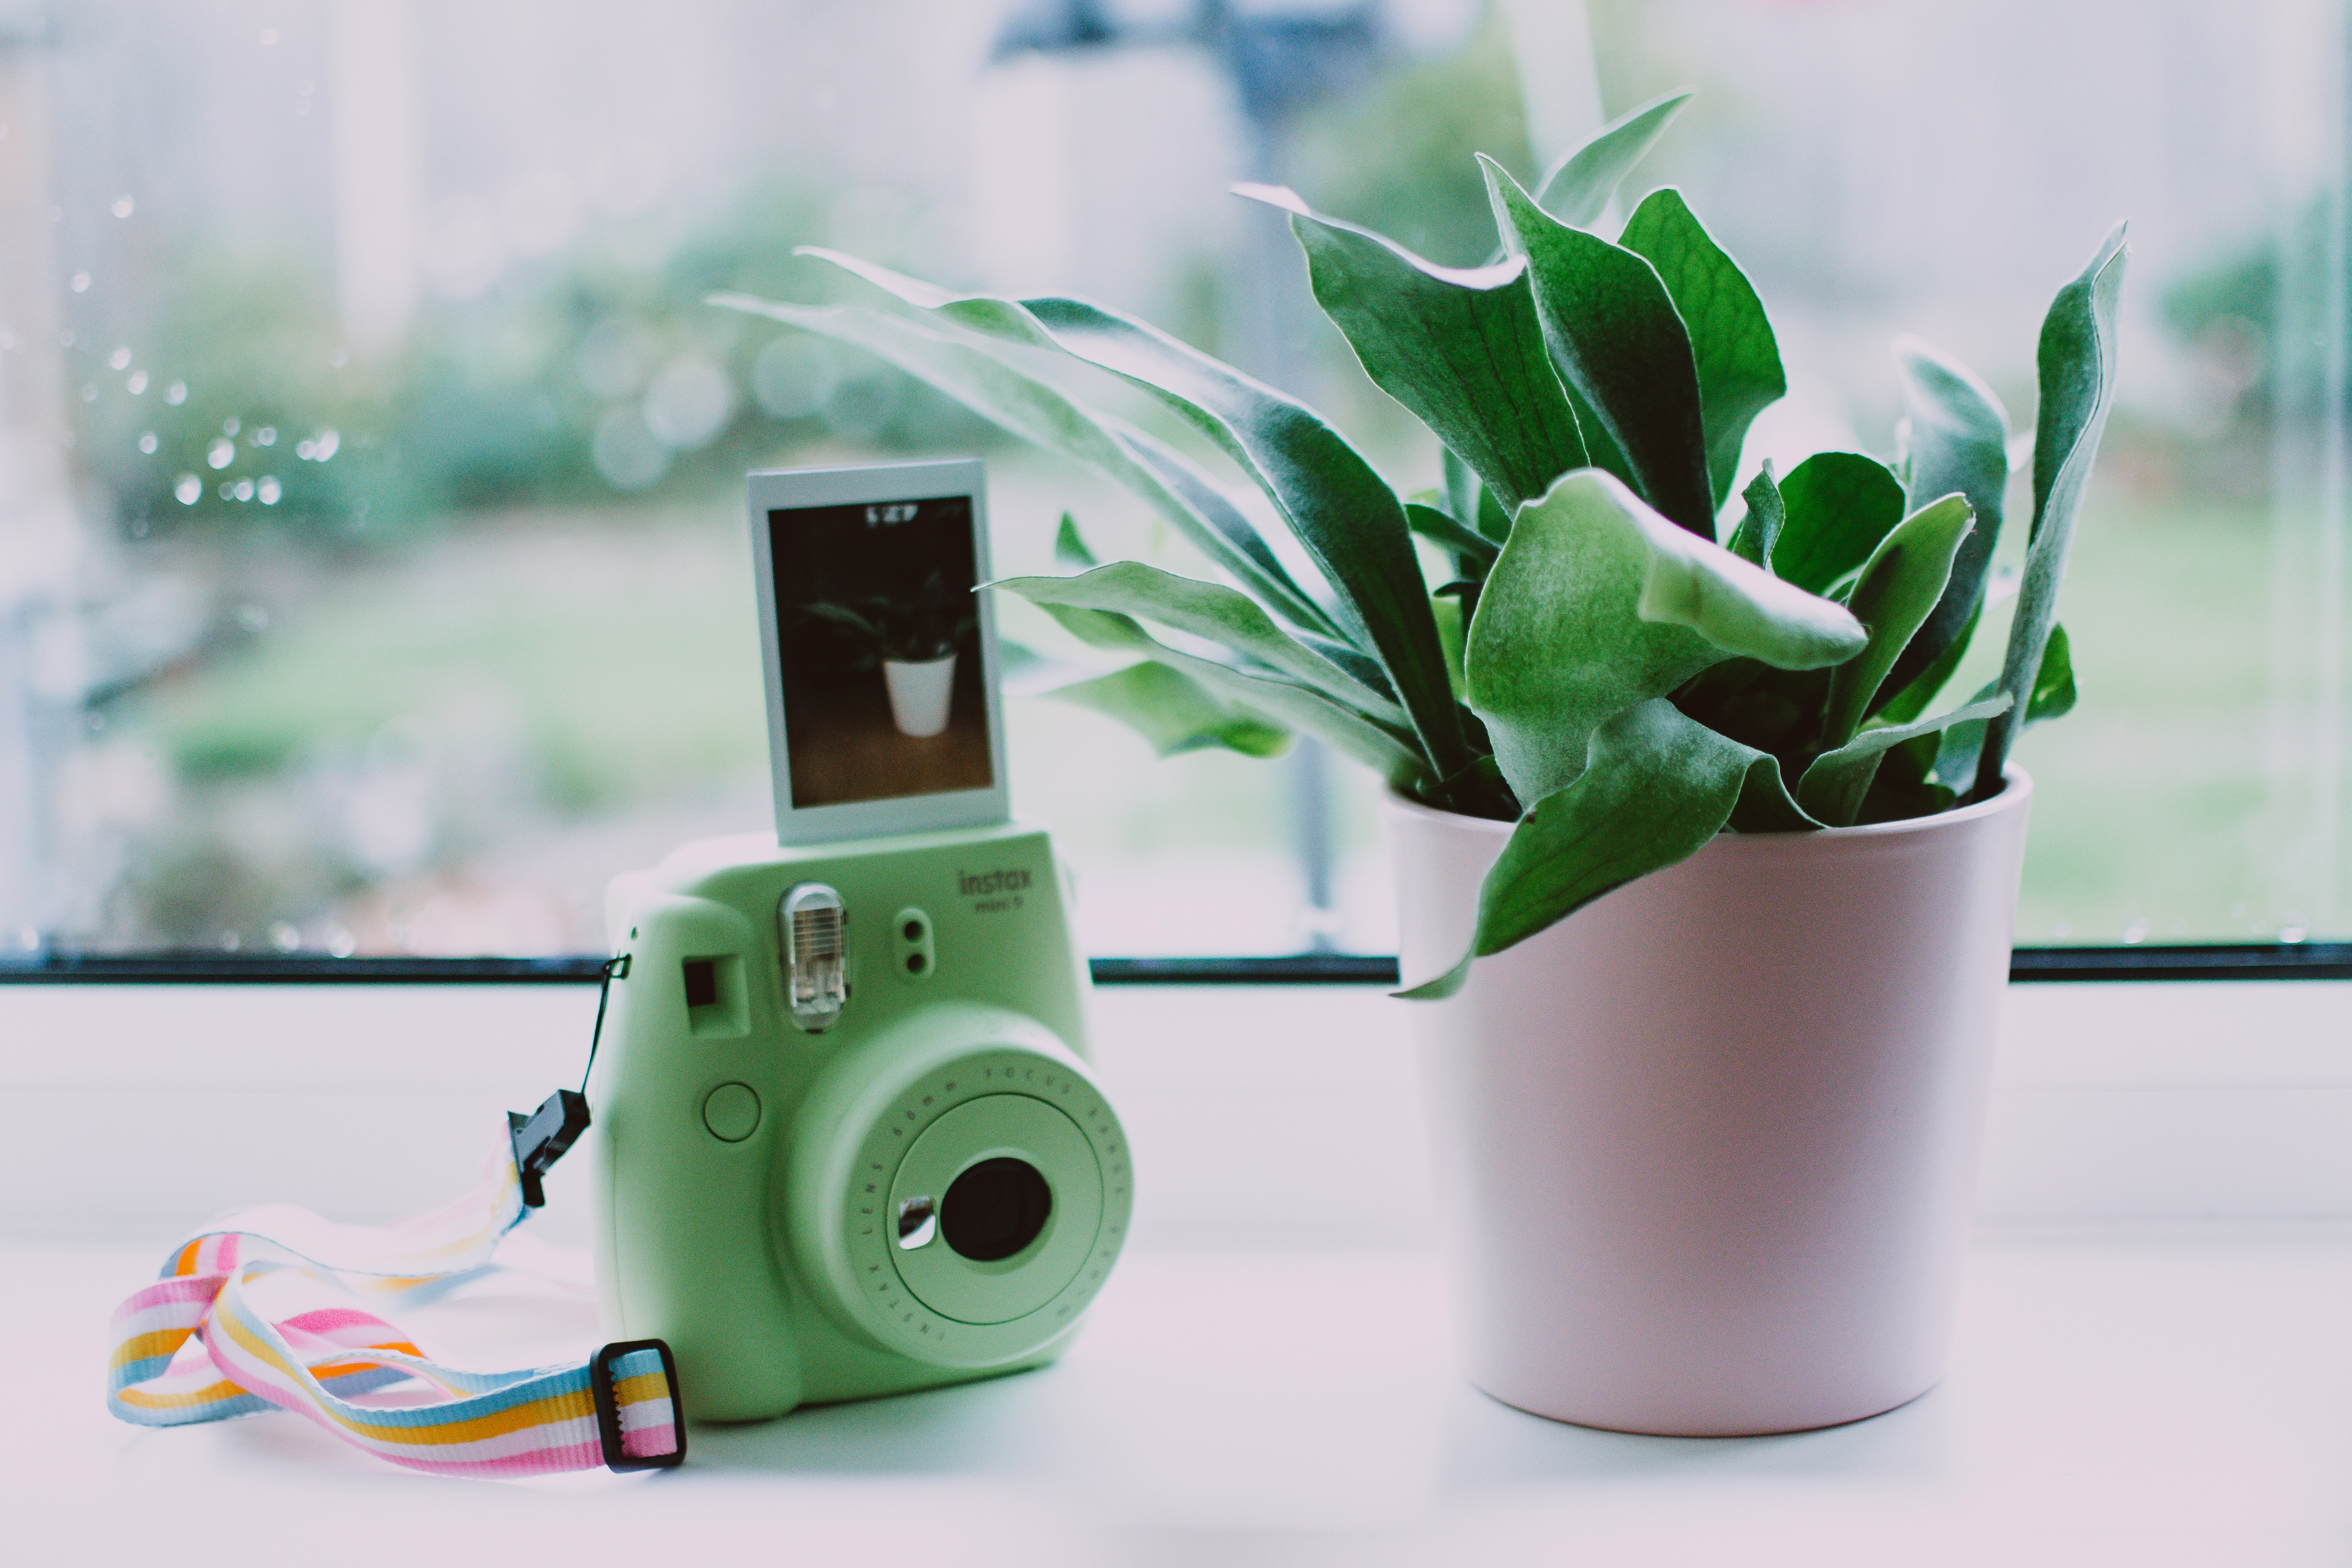 Green instant camera standing on a windowsill next to a pot plant